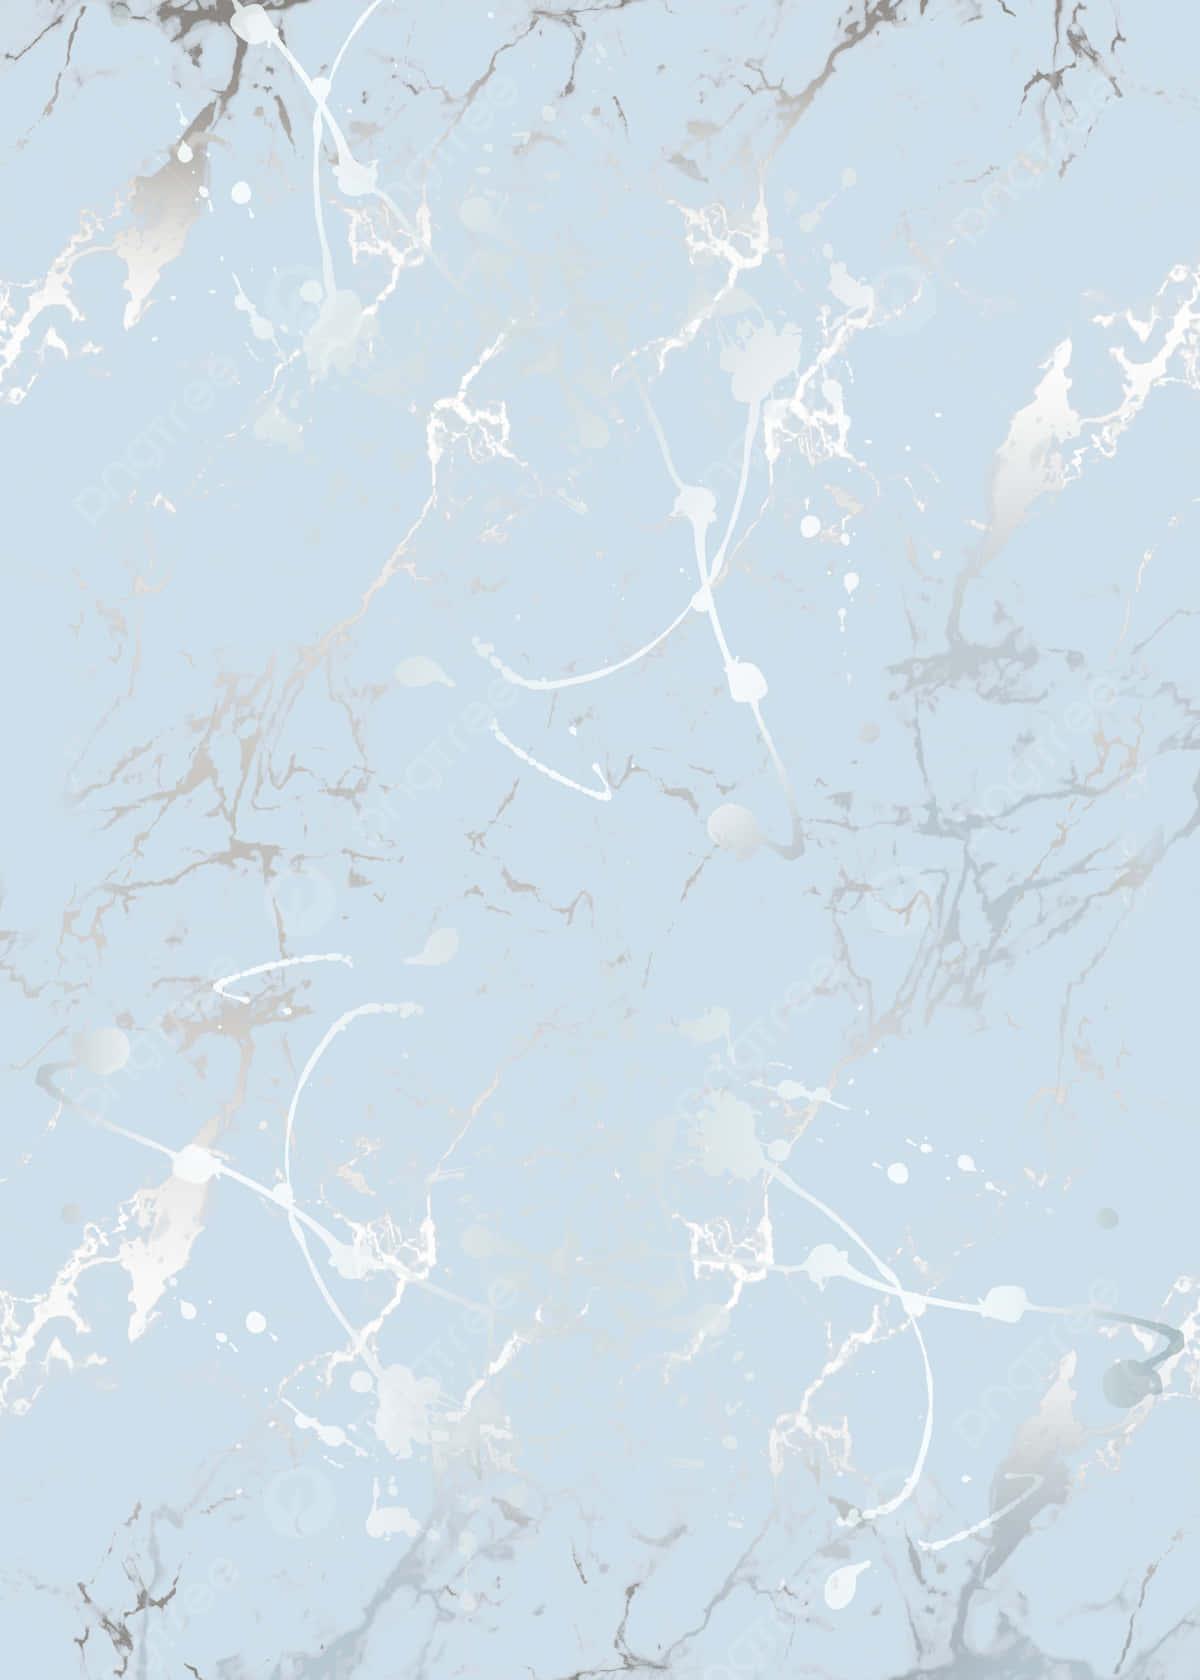 Strikingly Simple Blue and Silver Abstract Wallpaper